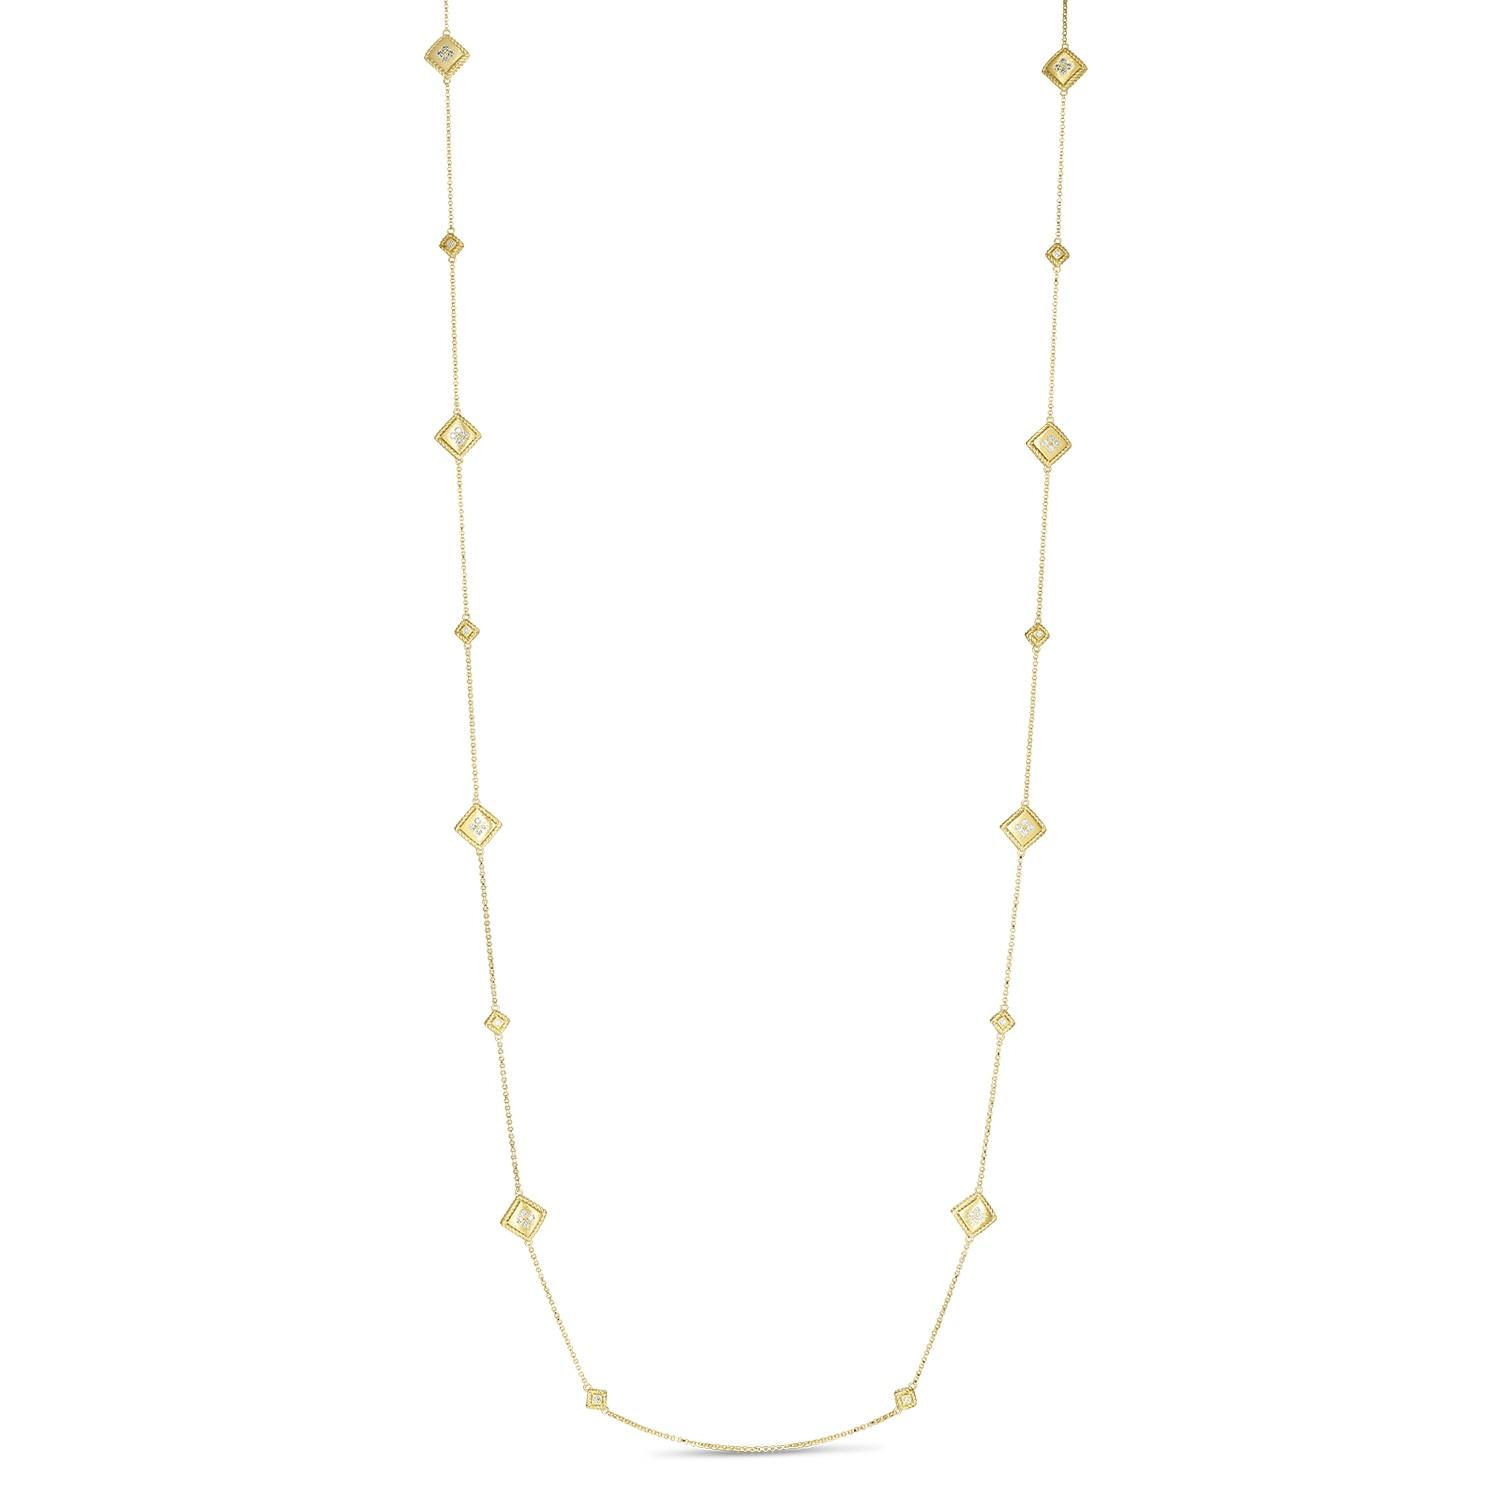 Roberto Coin 18k Yellow Gold Palazzo Ducale Diamond Station Necklace, 35" 0